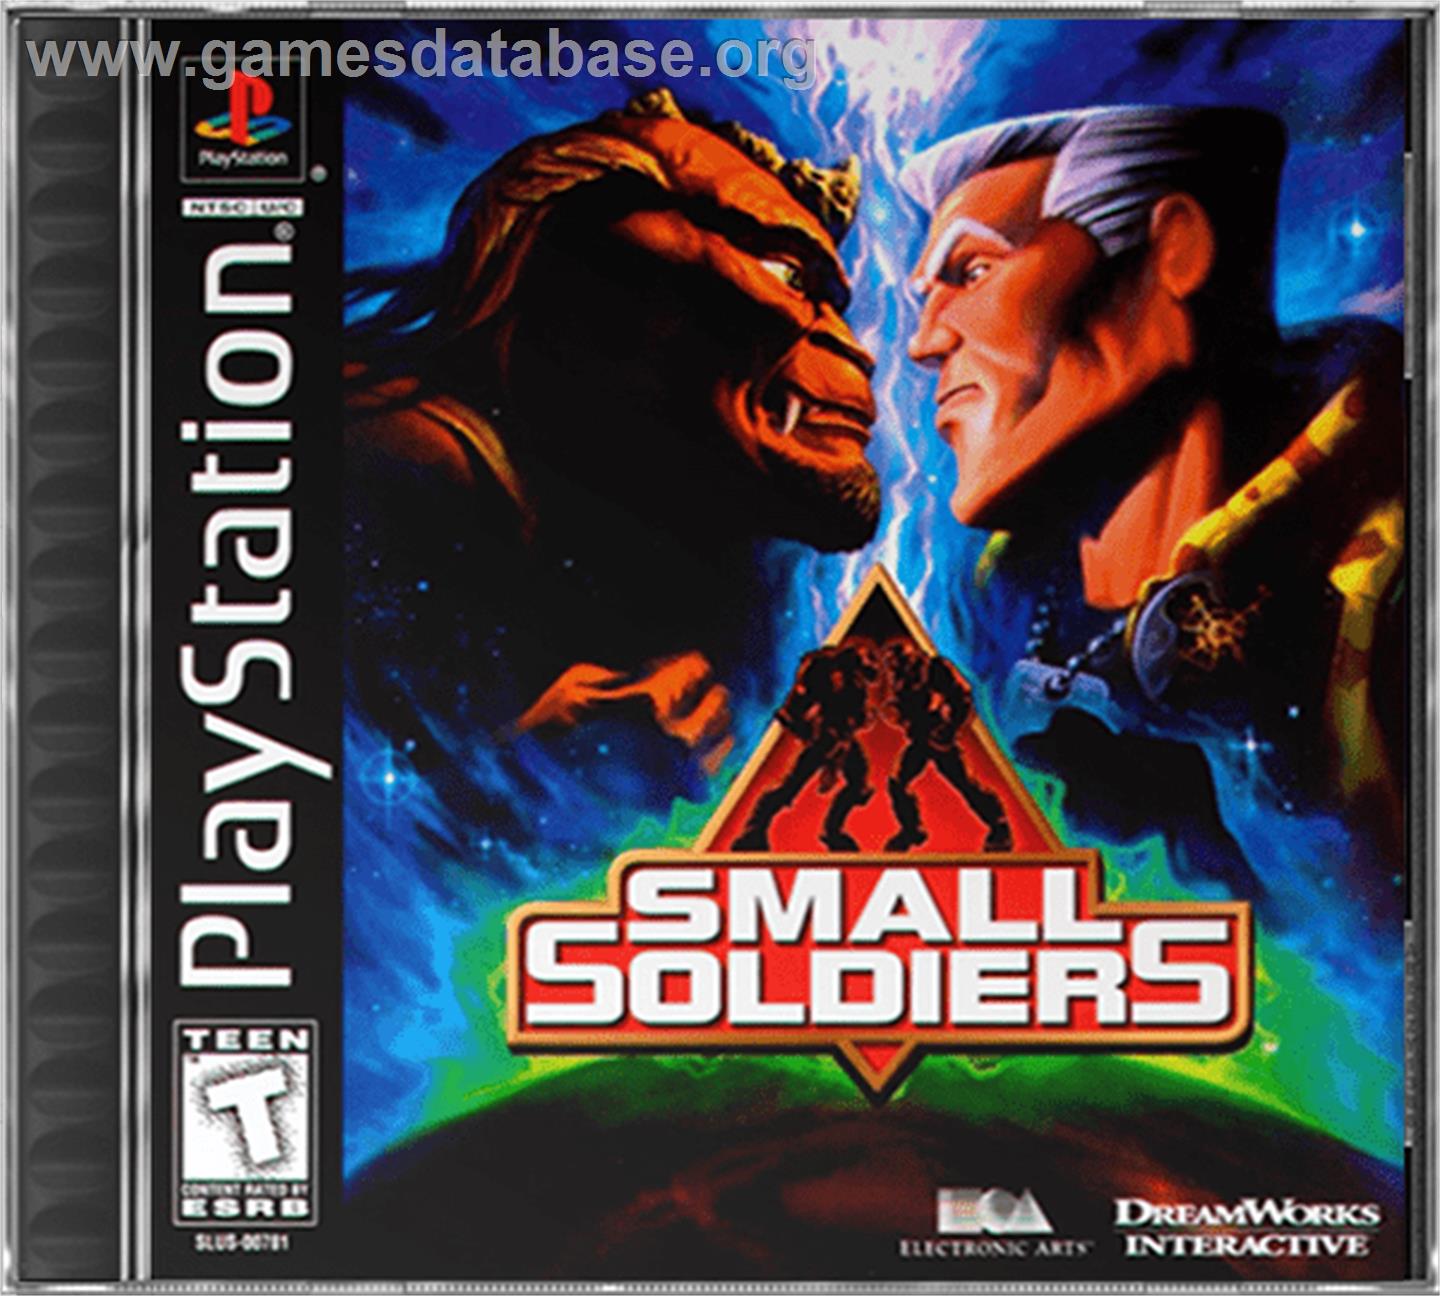 Small Soldiers - Sony Playstation - Artwork - Box